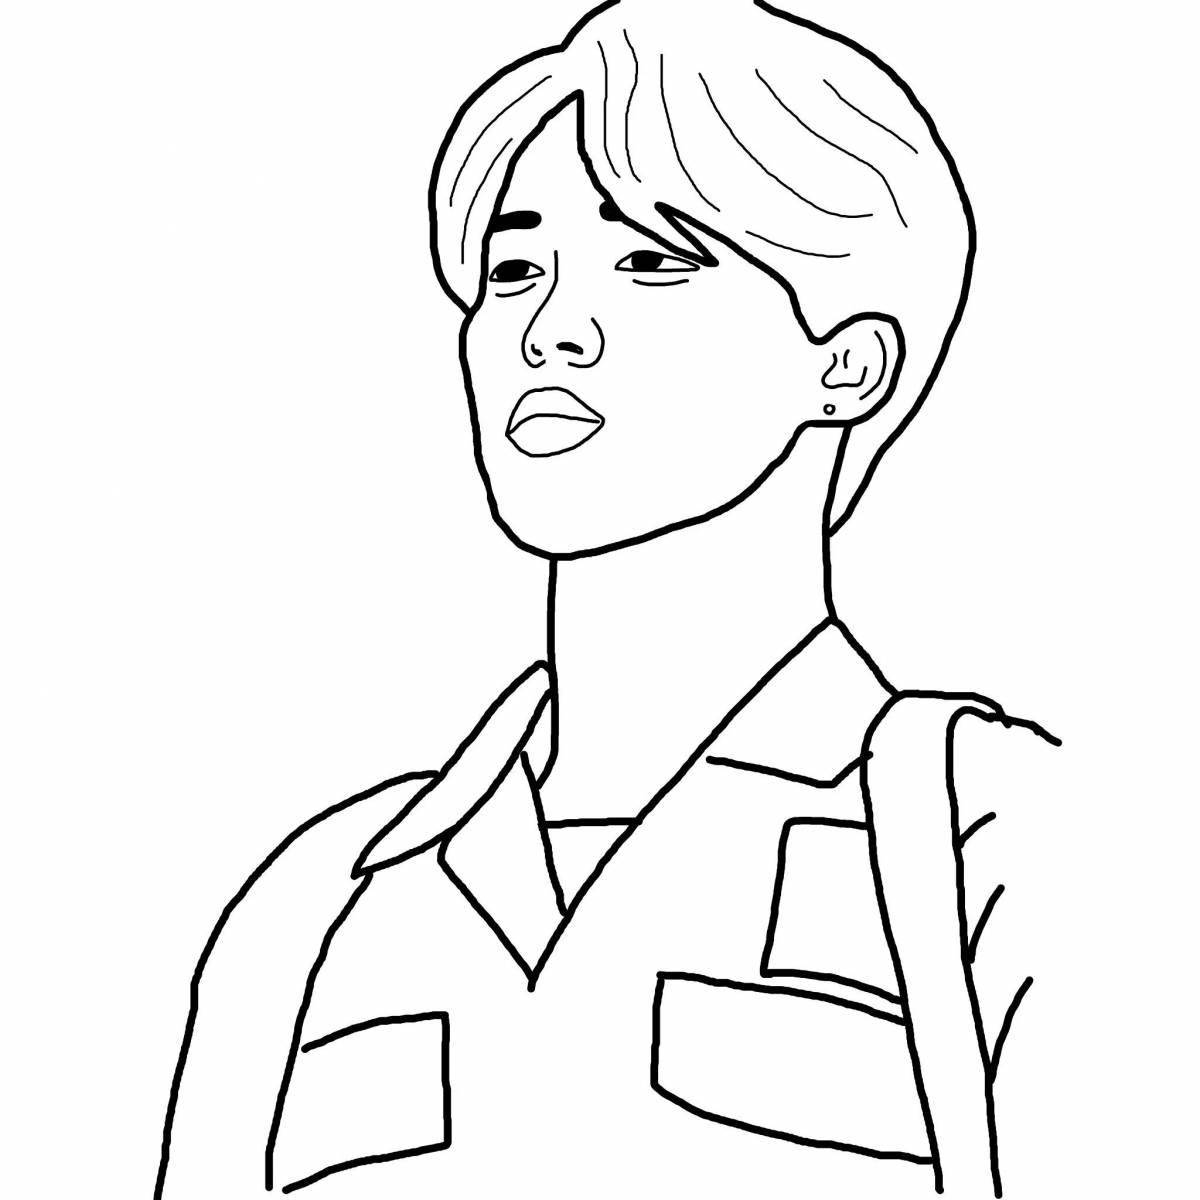 Bts taehyung amazing coloring book